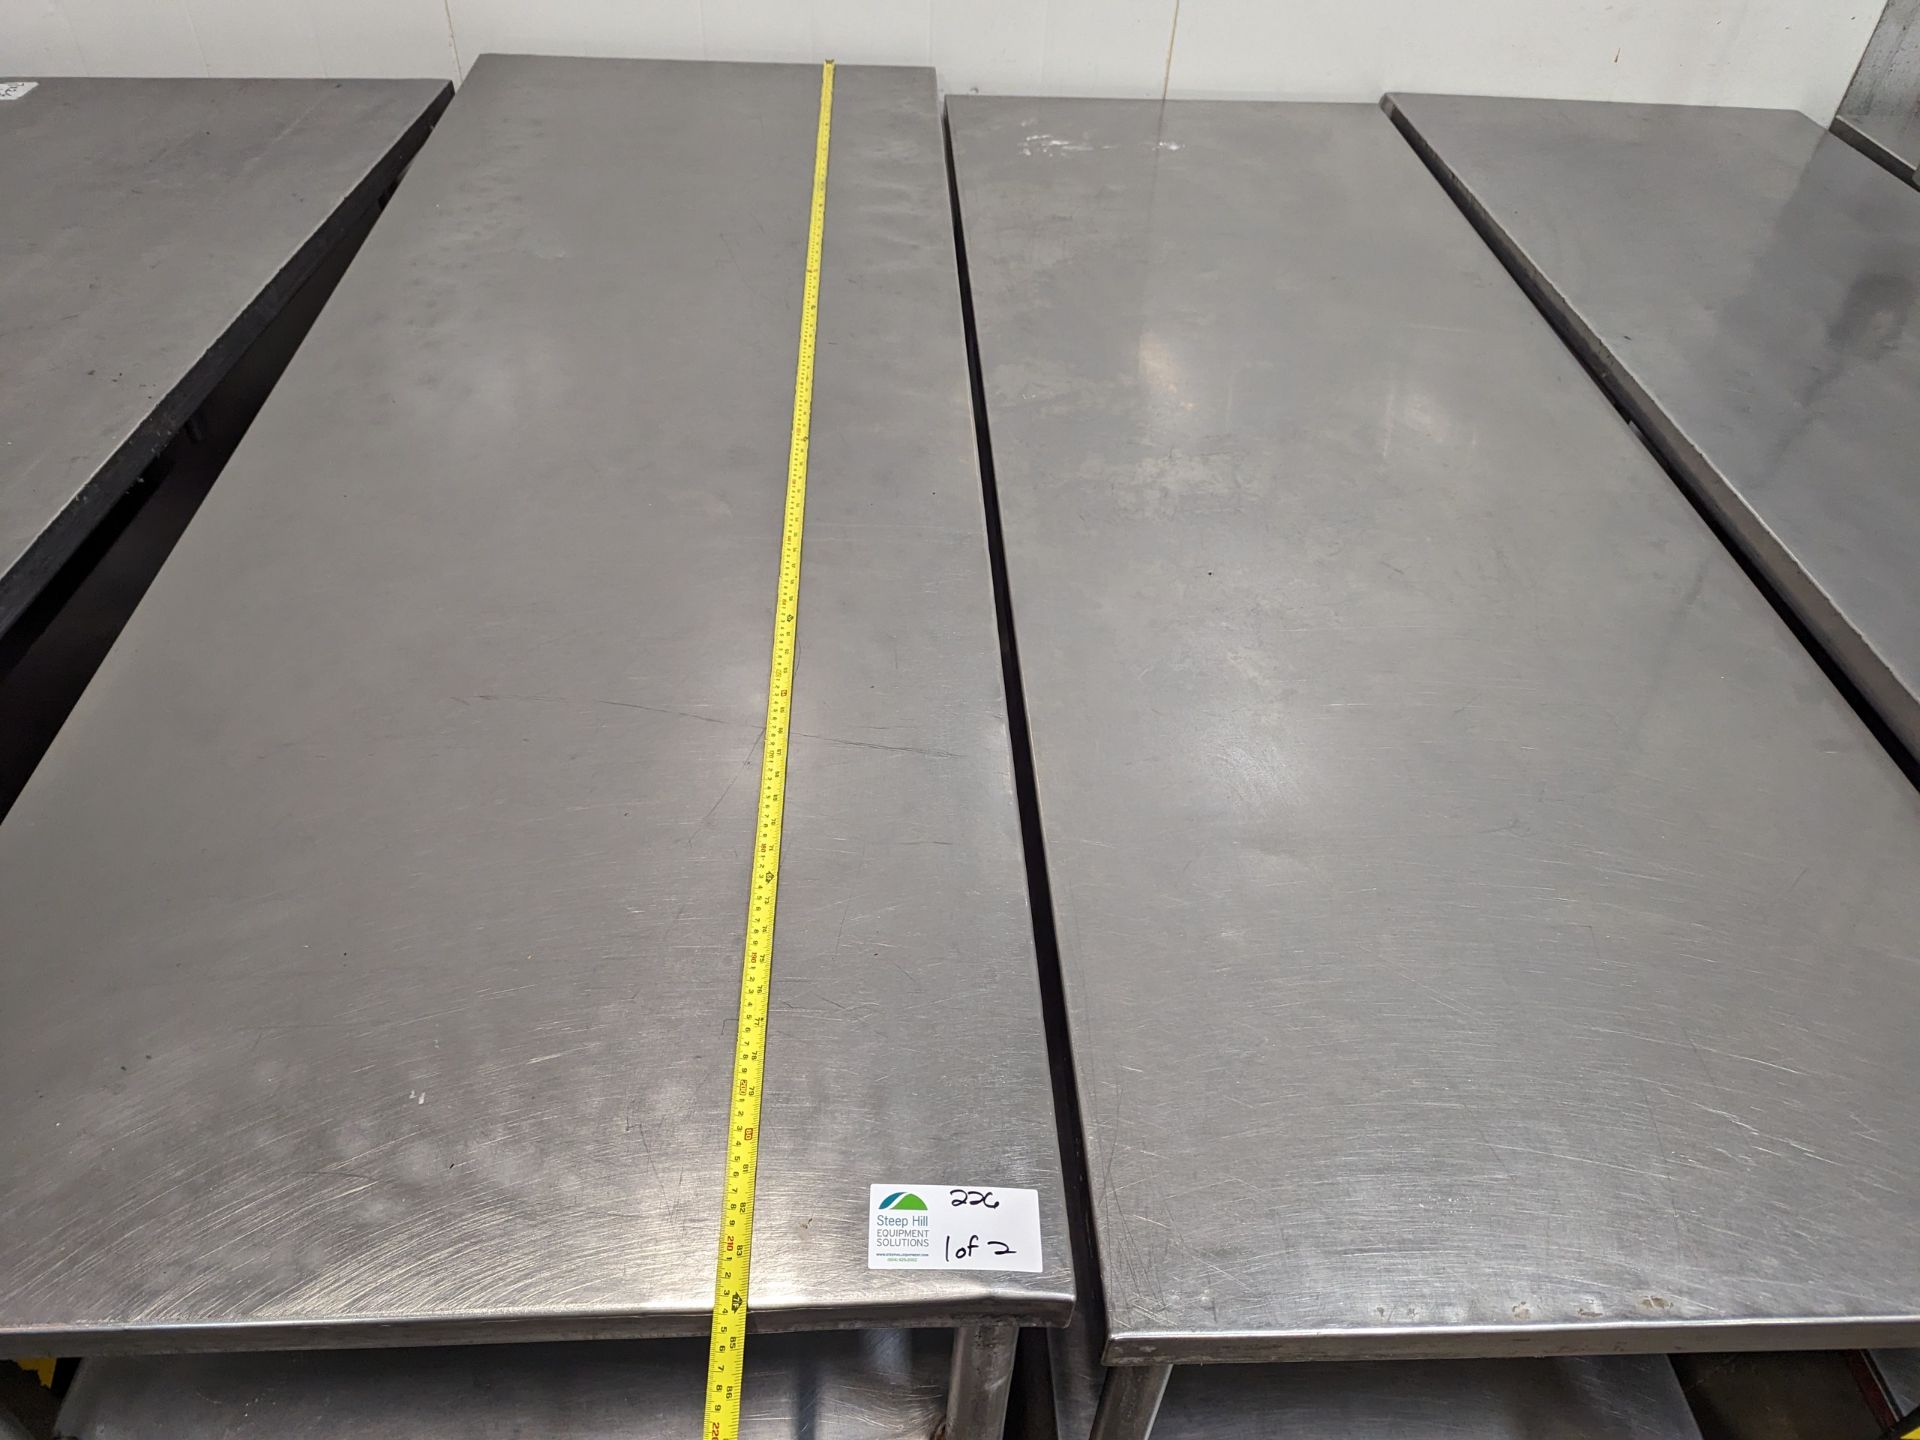 Lot of 2 7ft Long SS Tables, Dimensions LxWxH: 84x30x36 each - Image 3 of 6